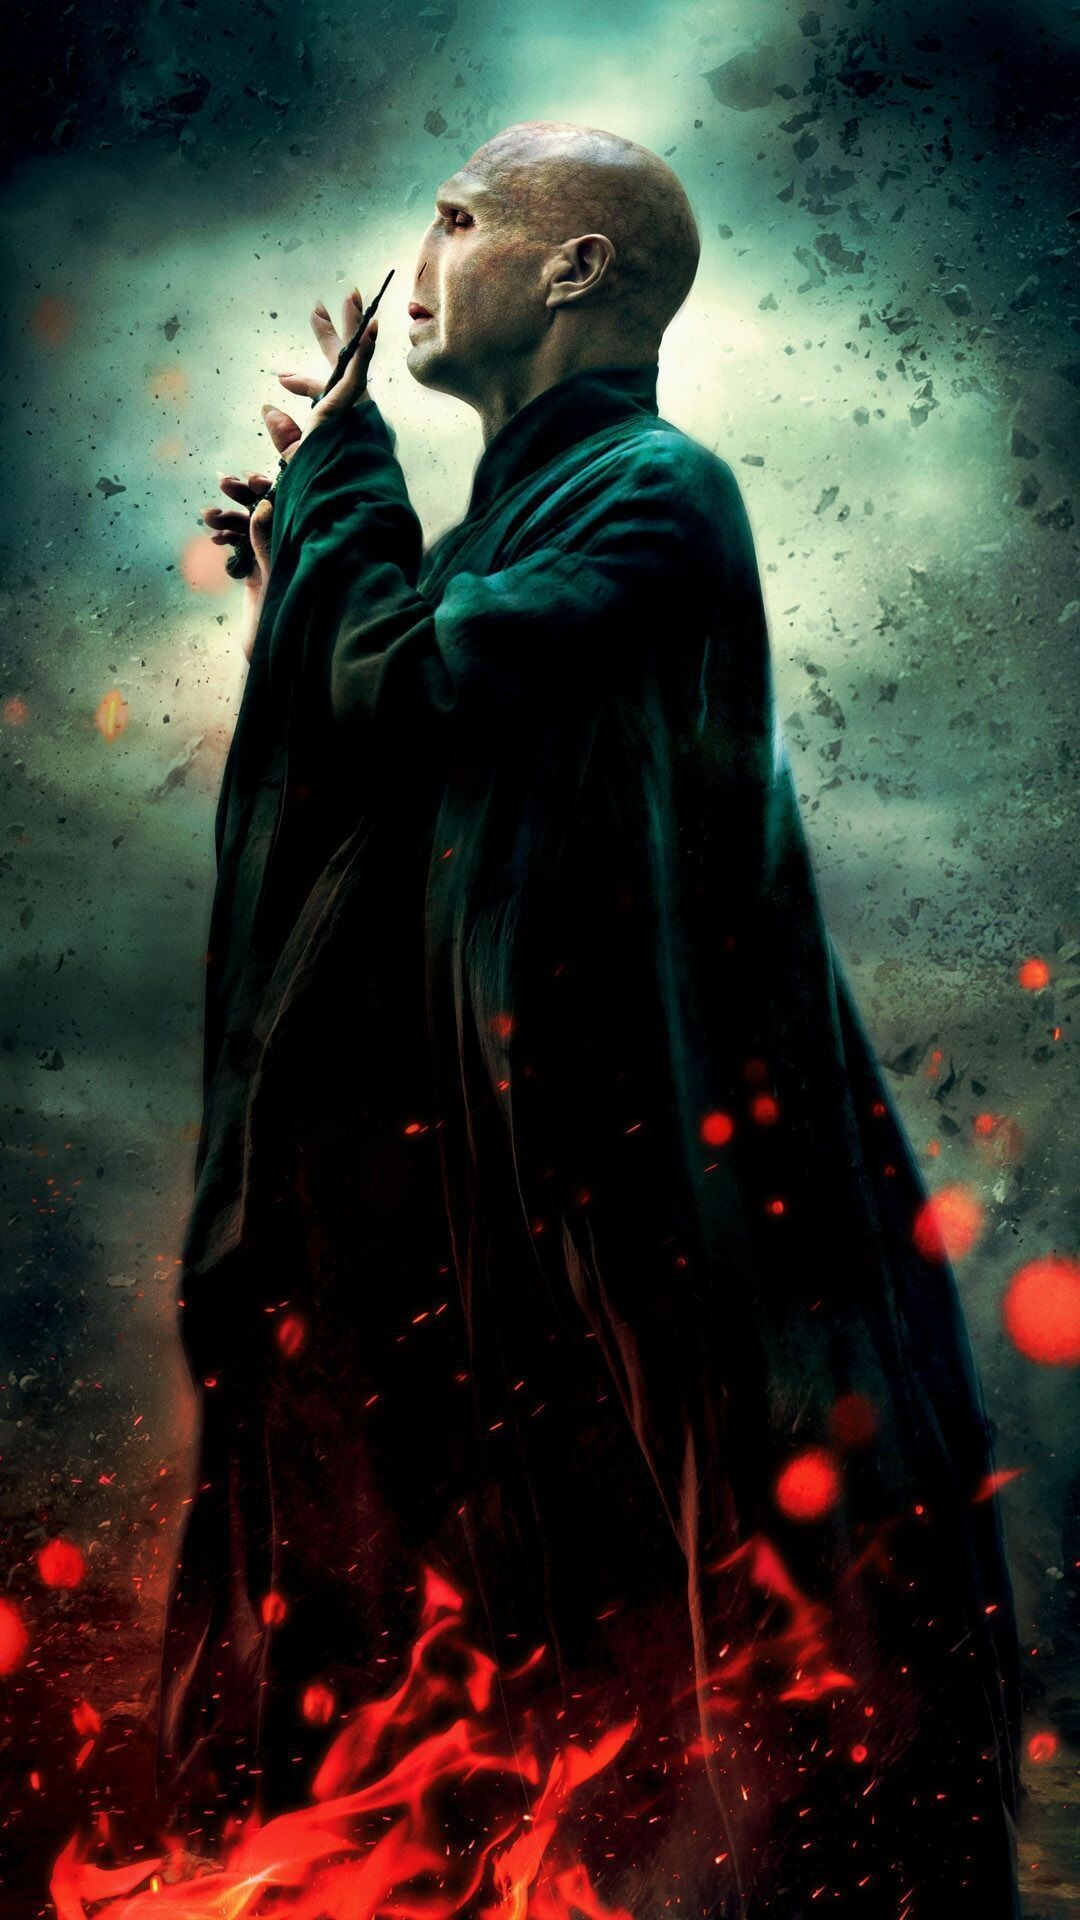 HD wallpaper, 1080X1920 Full Hd Phone, Dark Wizard, Lord Voldemort Wallpapers, Mobile 1080P Harry Potter Wallpaper Image, Magical Franchise, Harry Potter